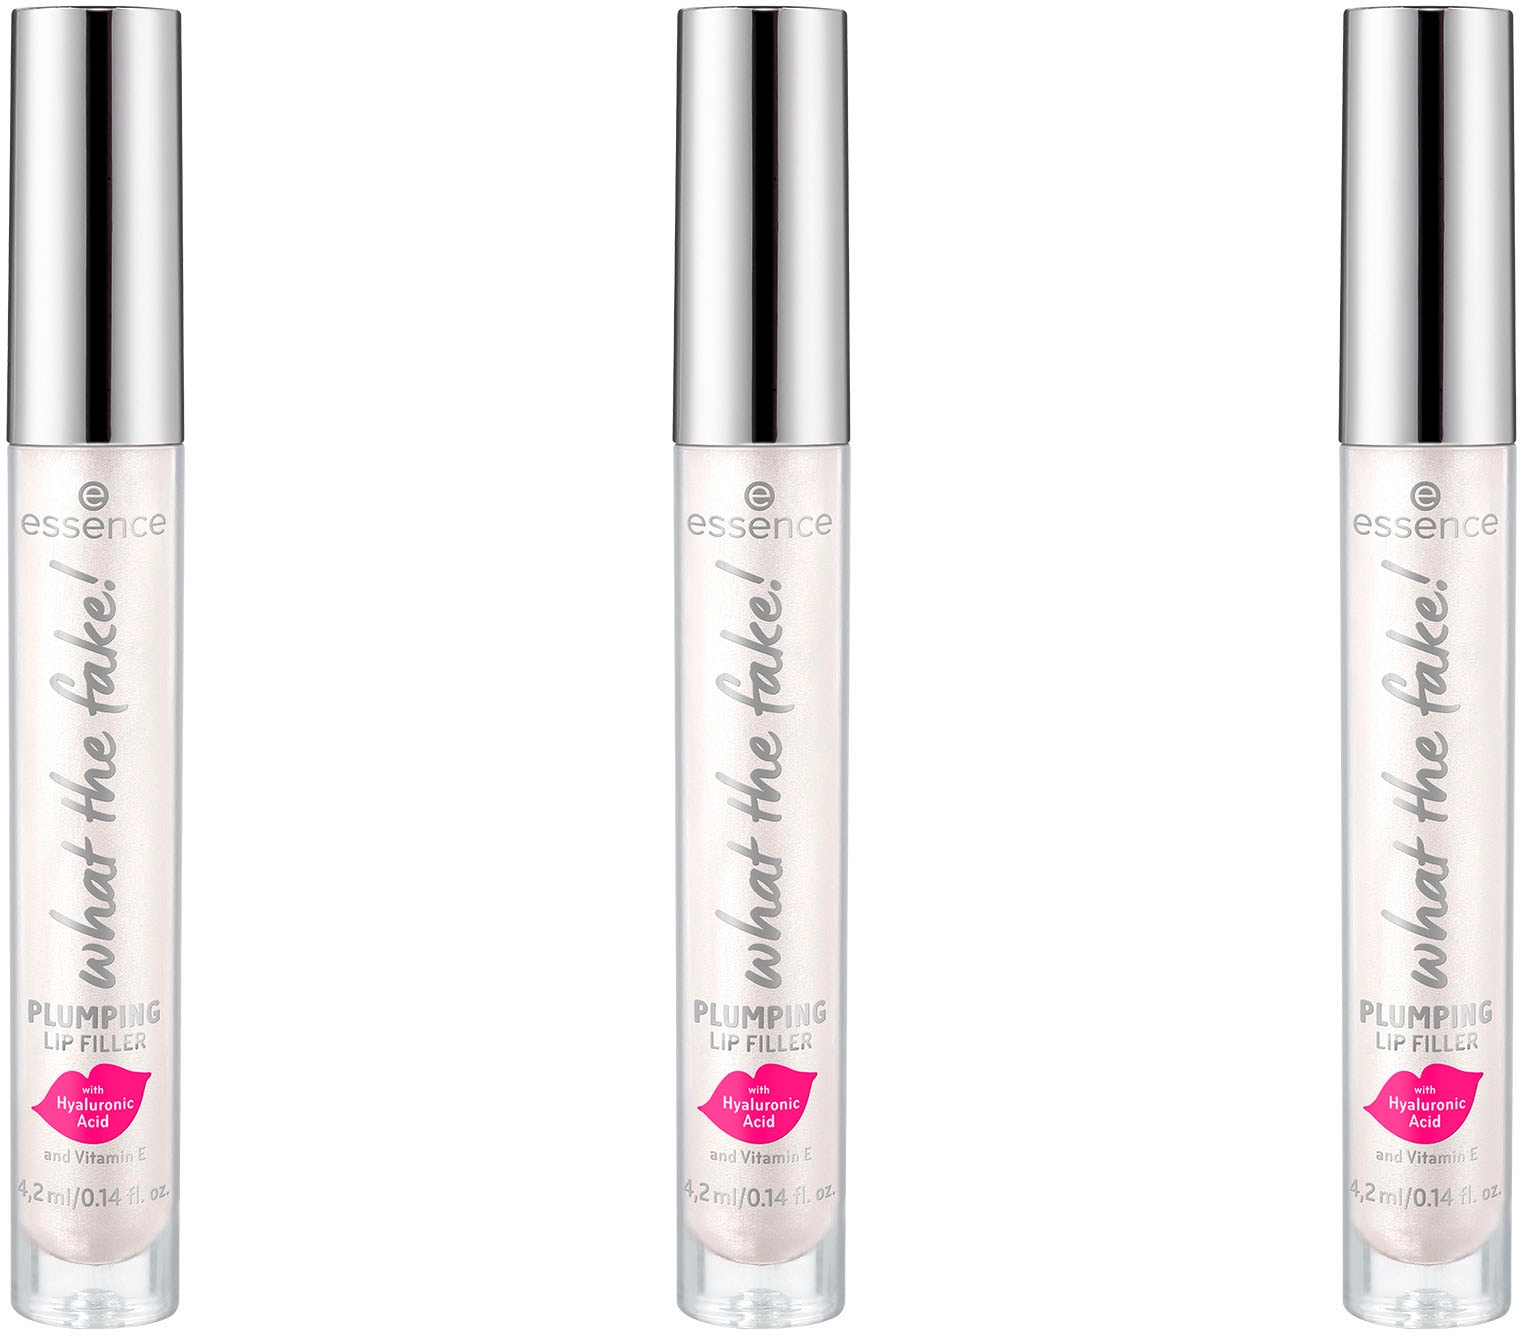 Essence Lipgloss »what FILLER«, PLUMPING online kaufen tlg.) 3 (Set, the fake! LIP